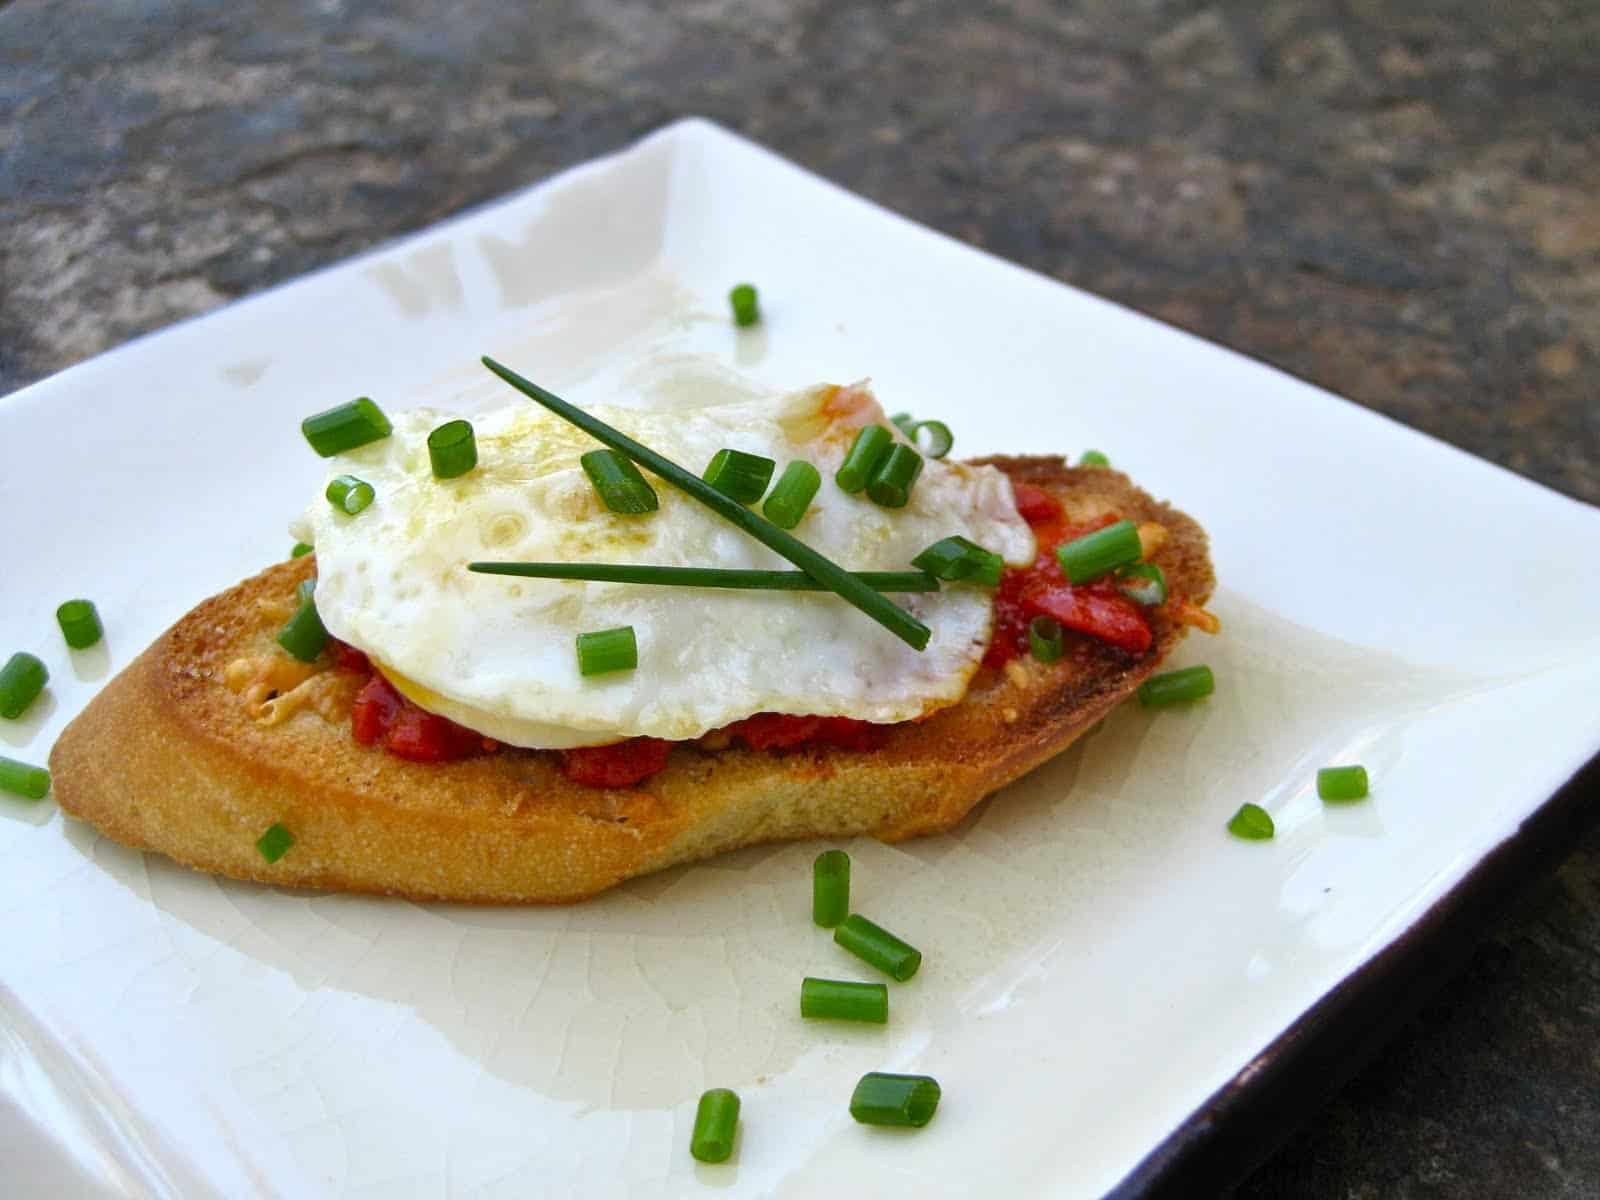 A pretty Bruschetta made from Crostini topped with red pepper sauce and a fried quail egg sprinkled with fresh herbs.